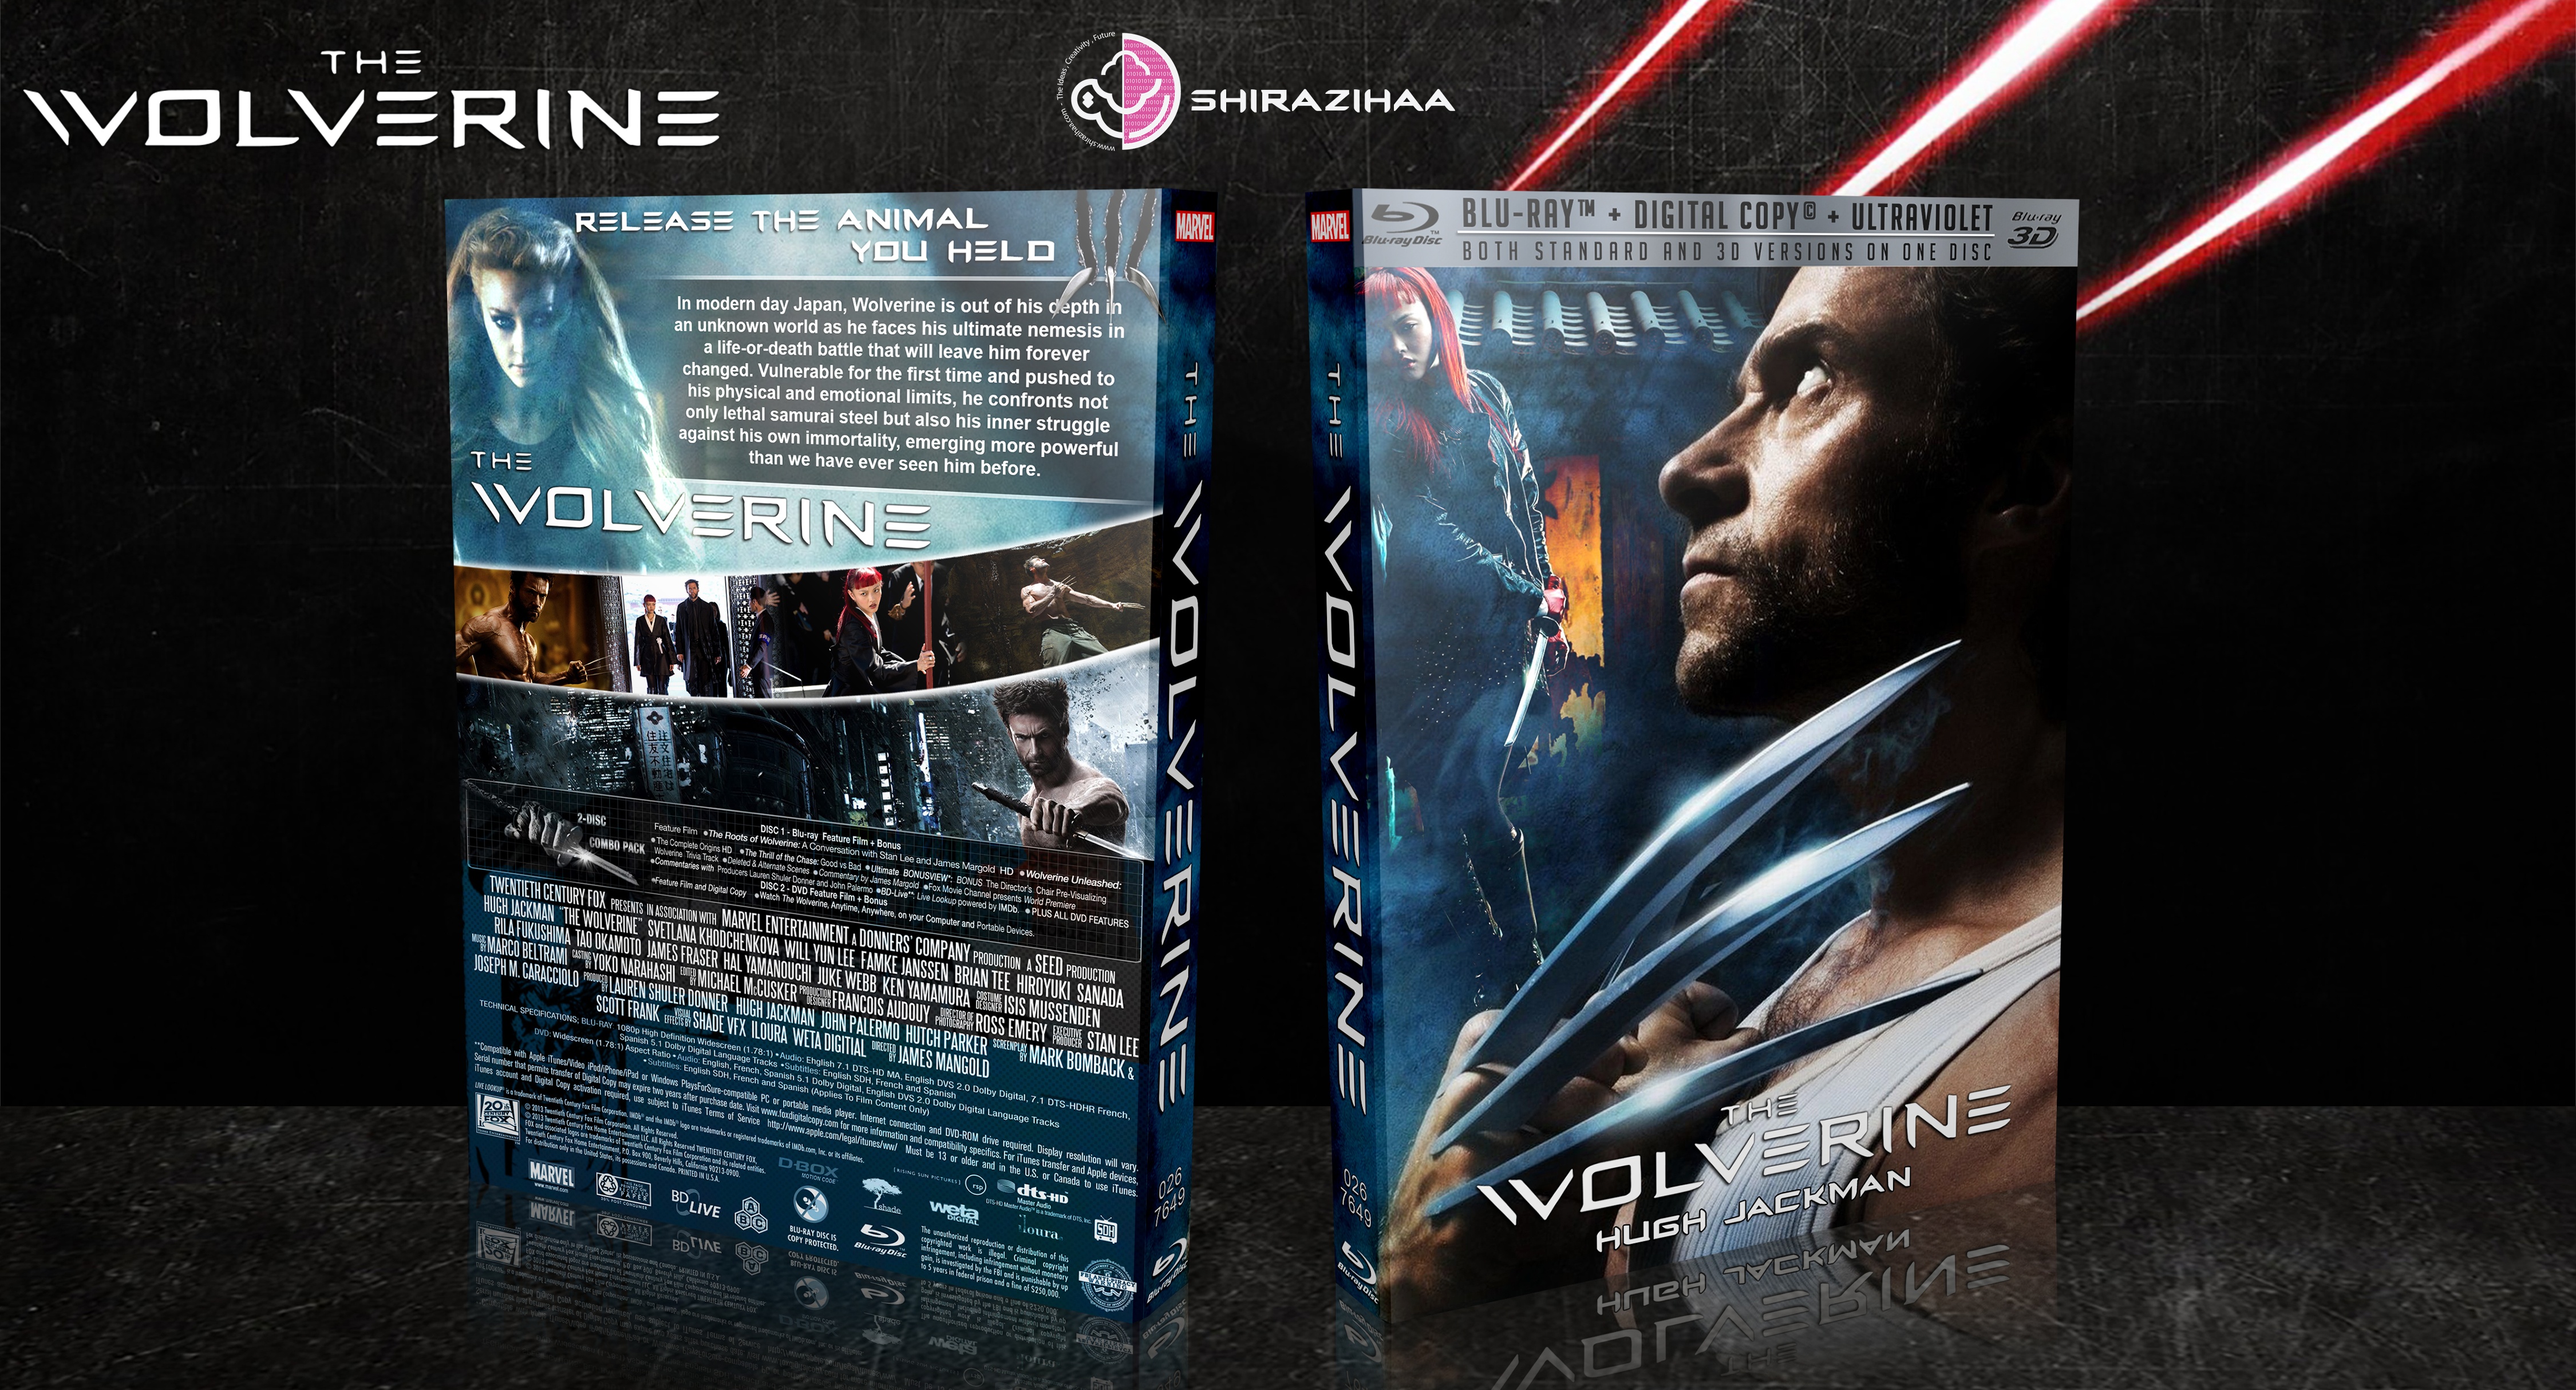 The Wolverine box cover